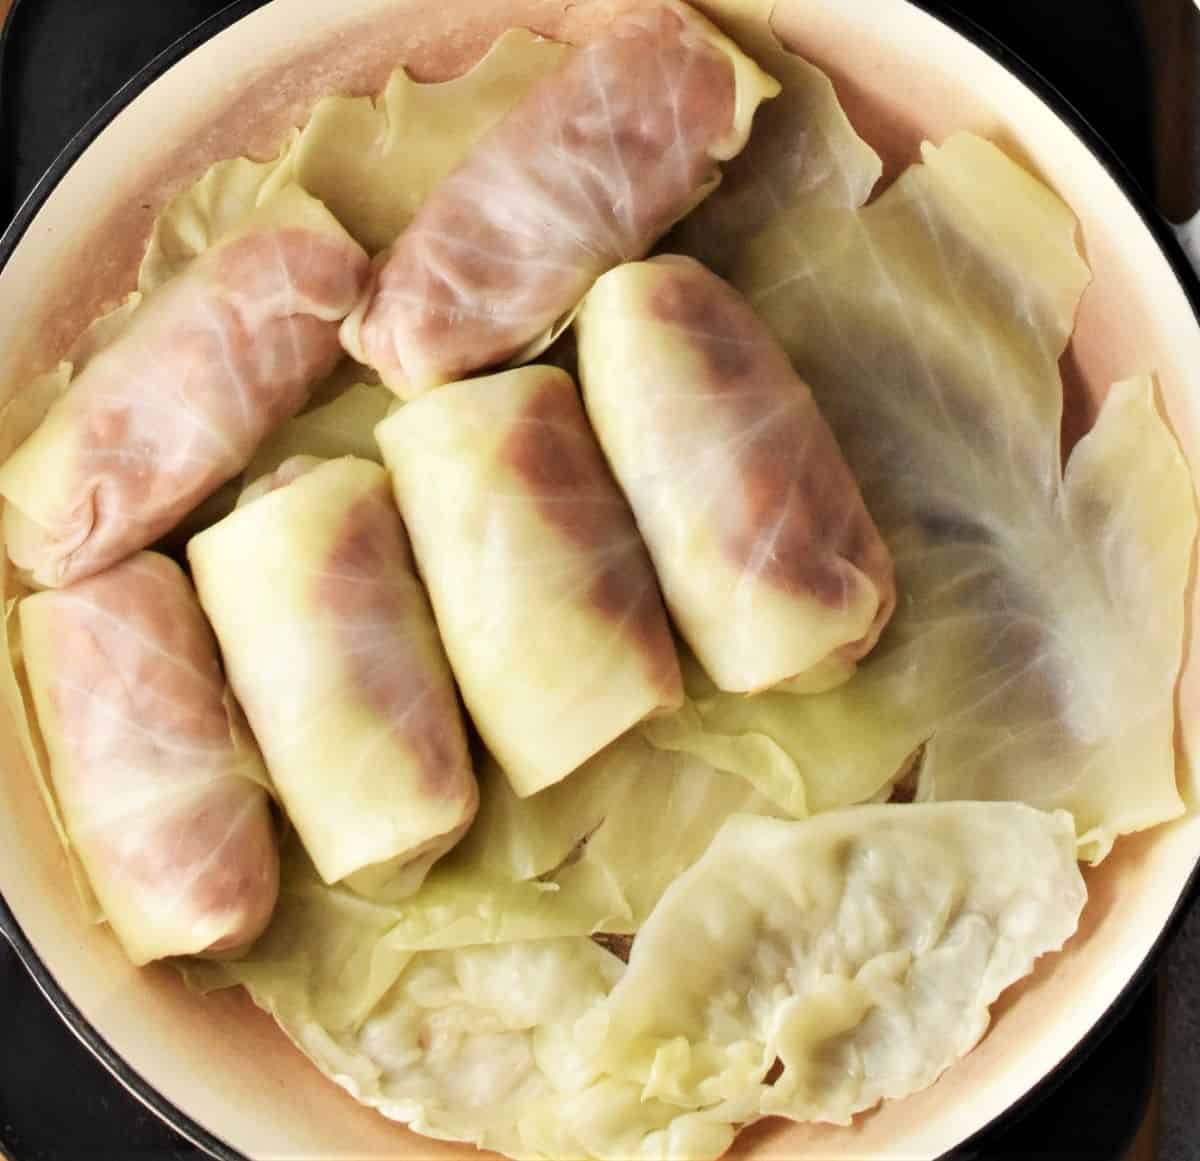 Arranging cabbage rolls in cabbage covered bottom of shallow dish.